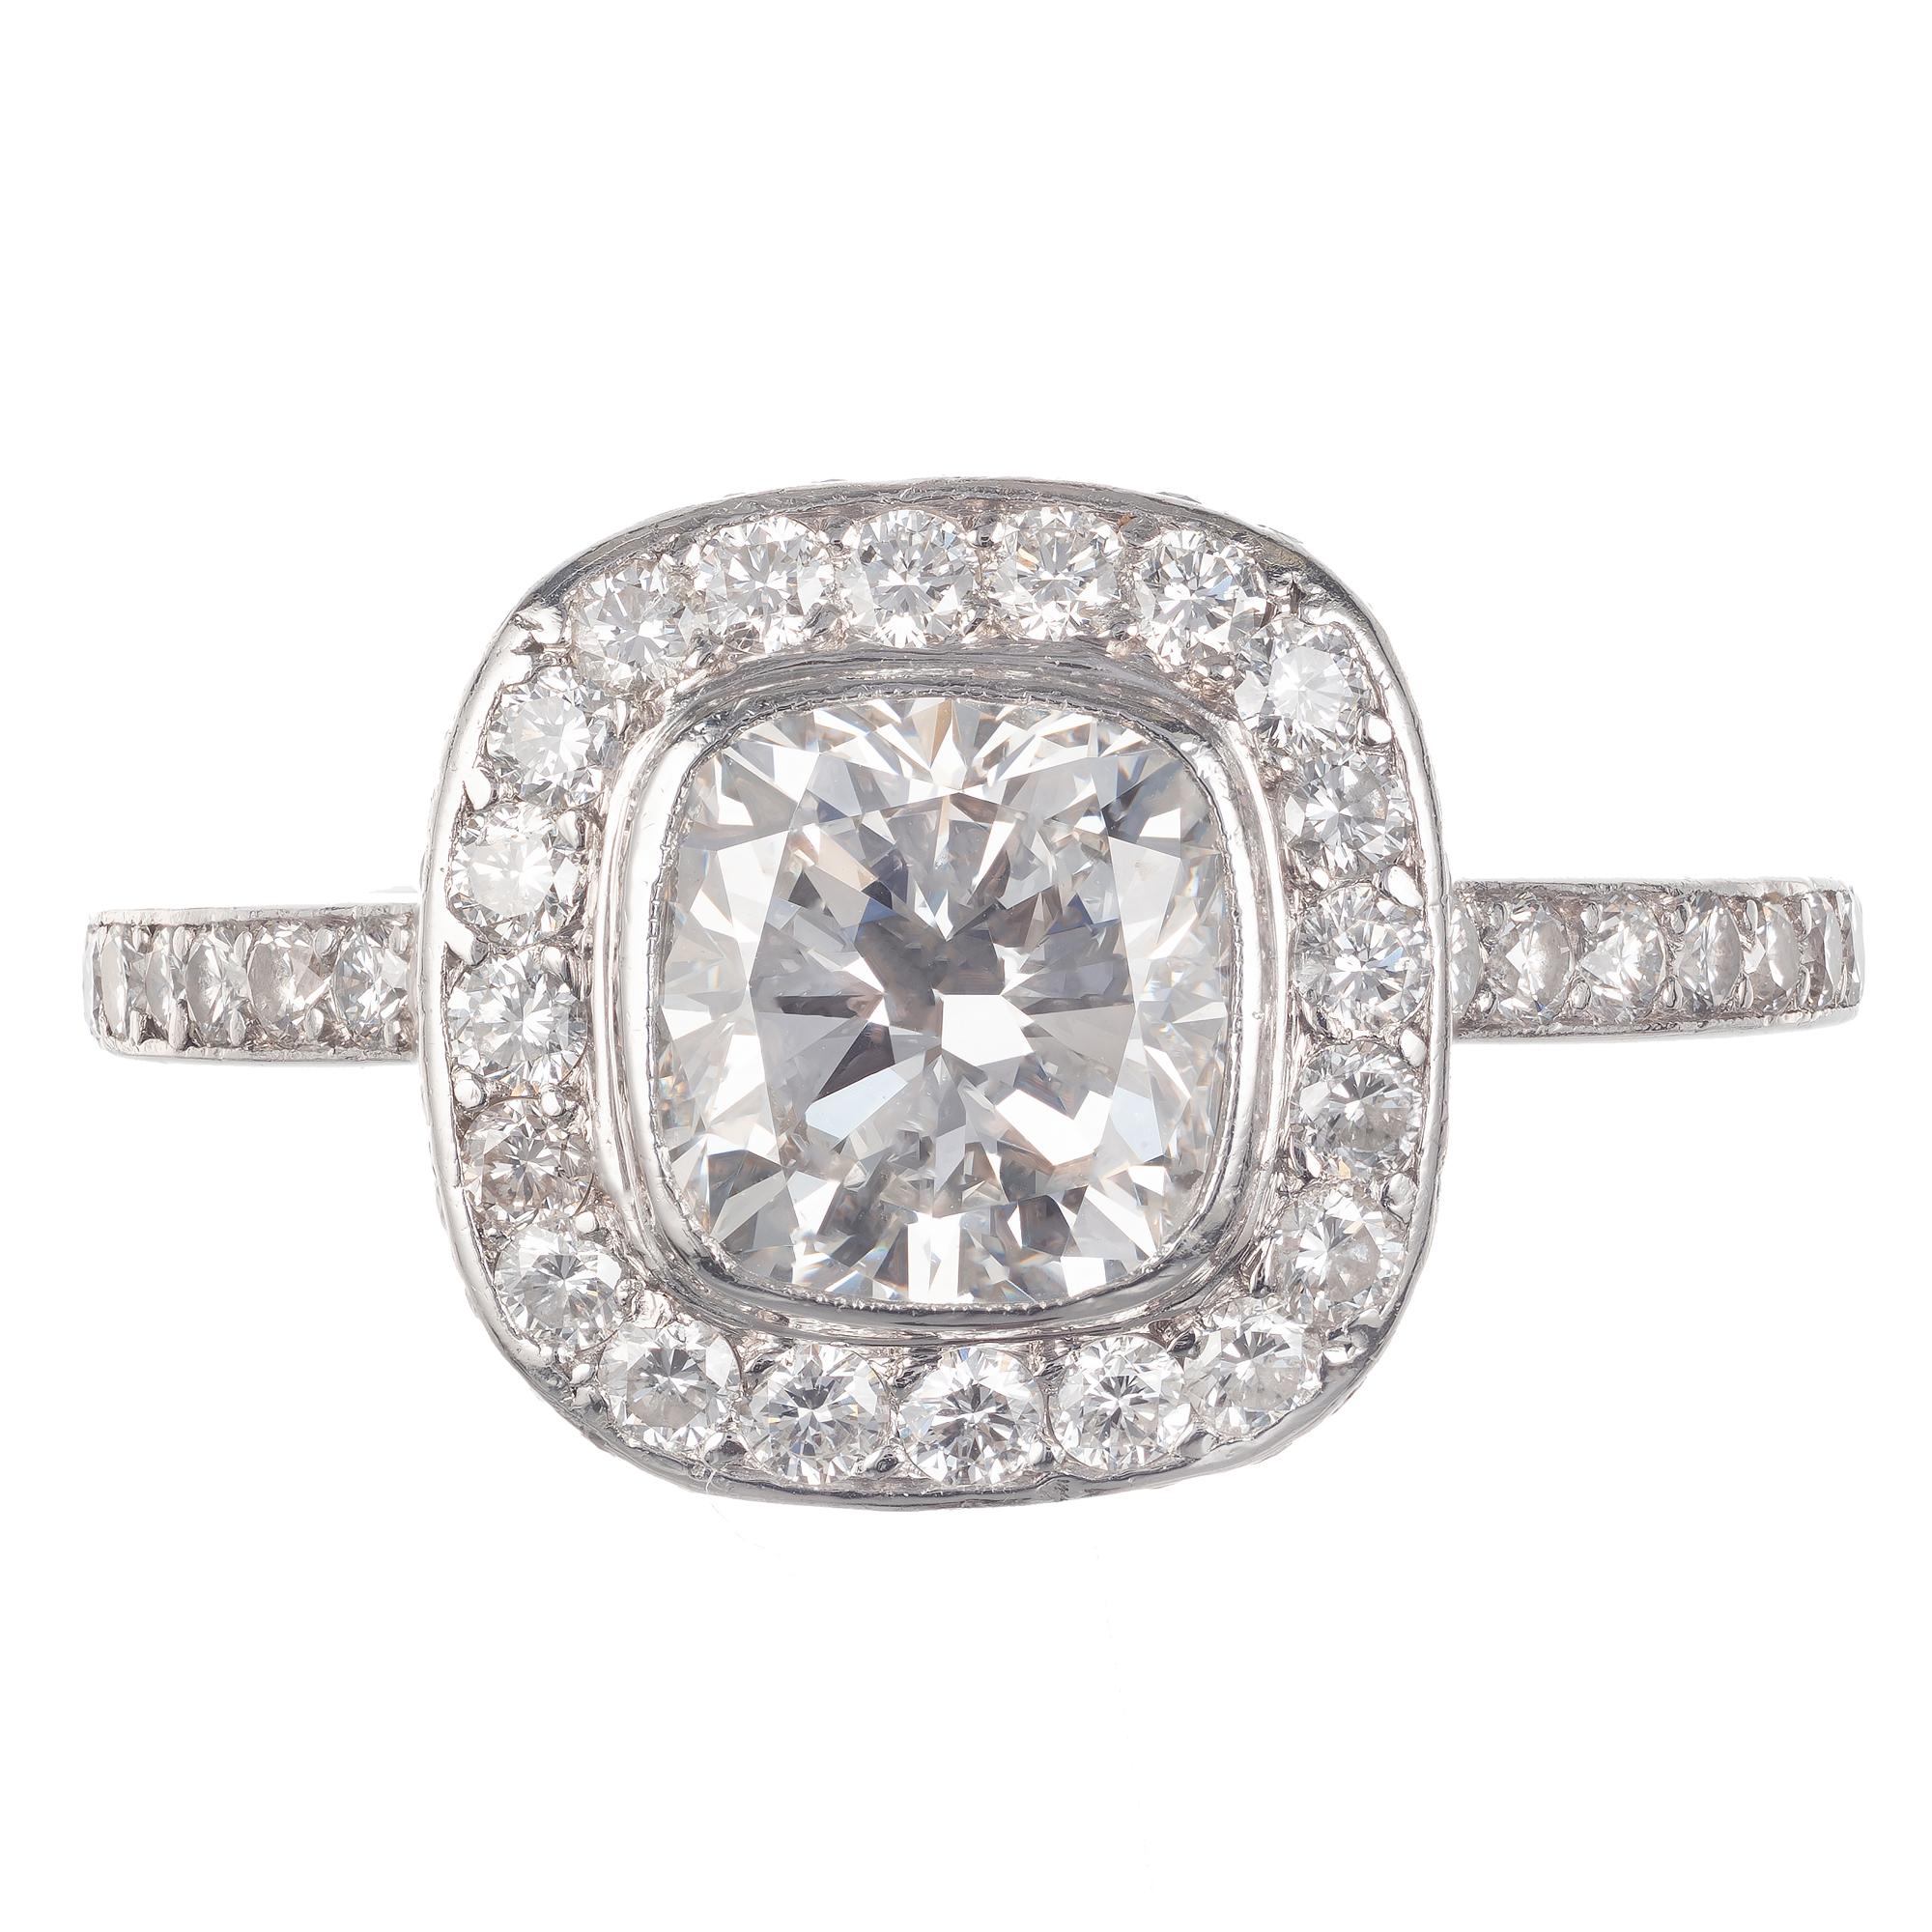 Halo design classic cushion top engagement ring with a cut cushion center diamond stone and a round diamond halo. GIA certified. 

1 cushion brilliant cut diamond, approx. total weight 1.51cts, F, VS2, Ideal cut, 6.96 x 6.52 x 4.42mm, Depth: 67.8% 